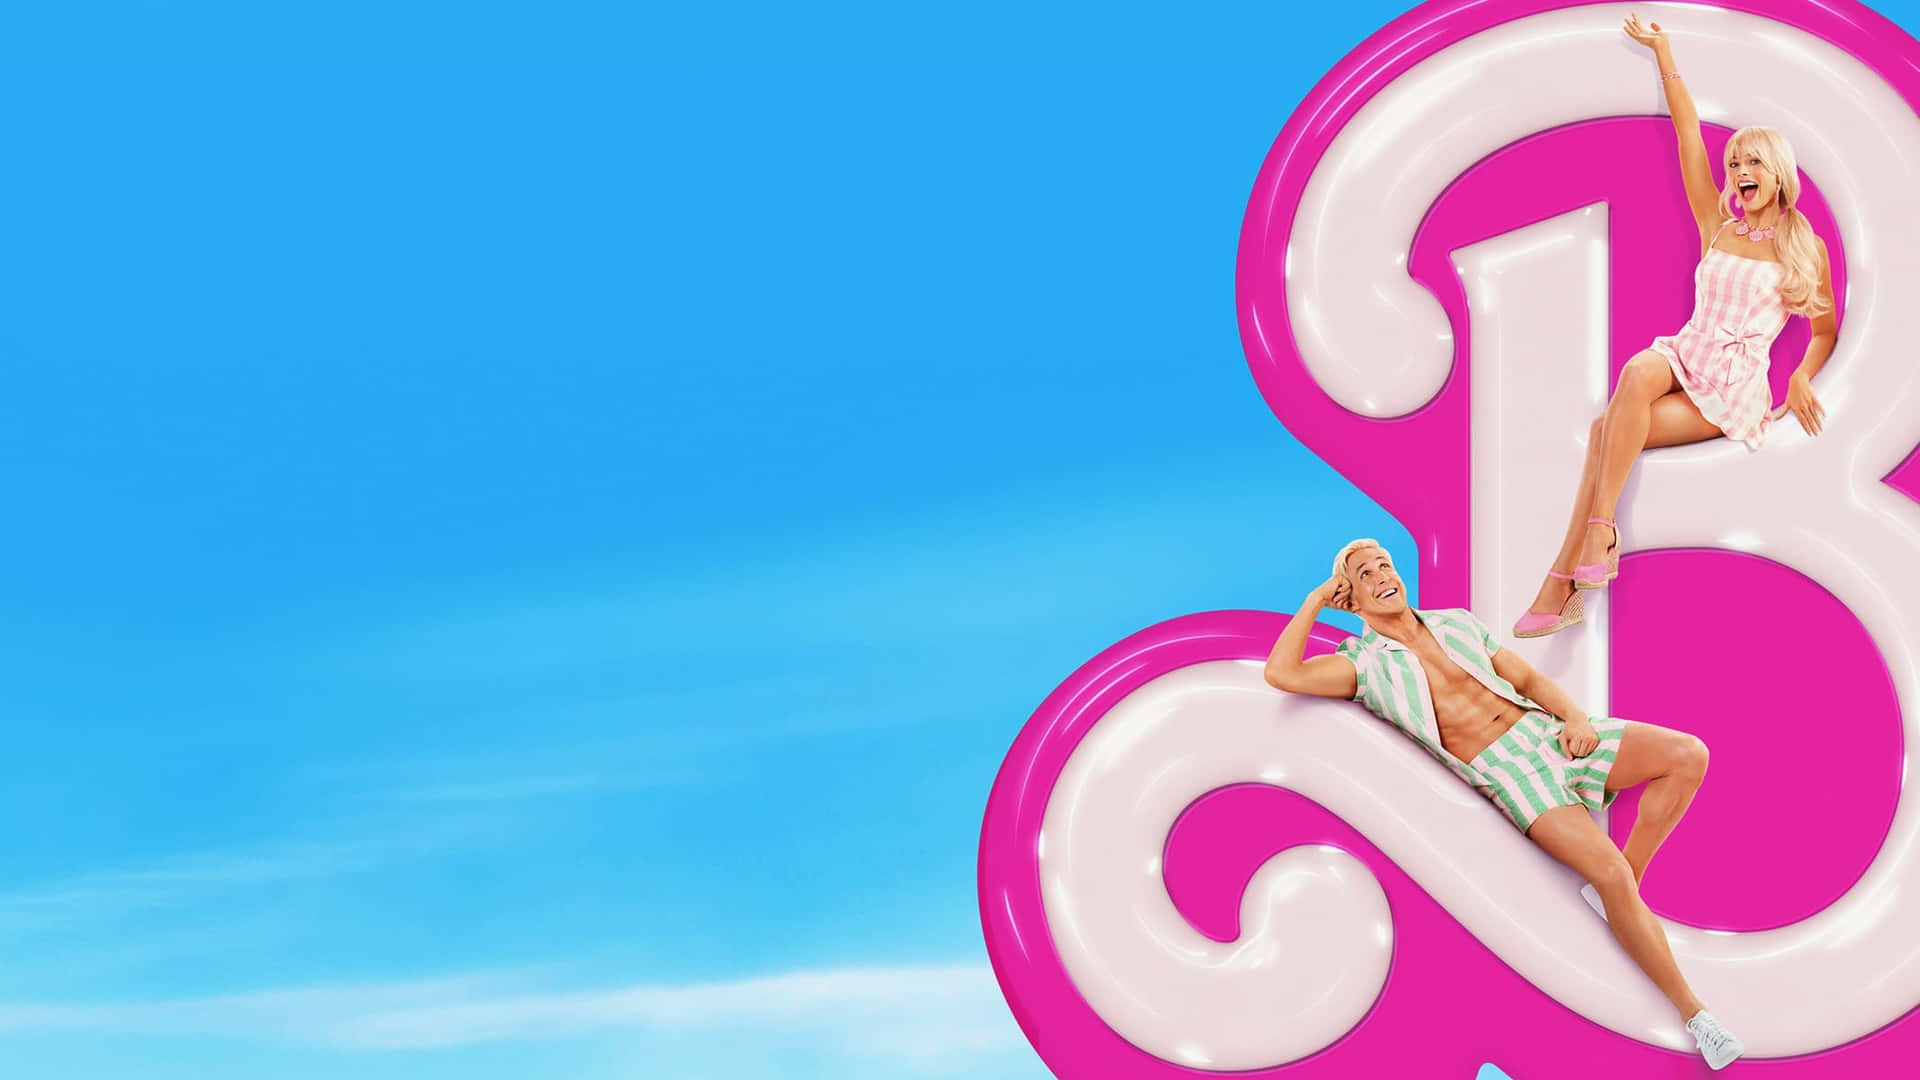 Barbie Movie Promotional Poster Wallpaper